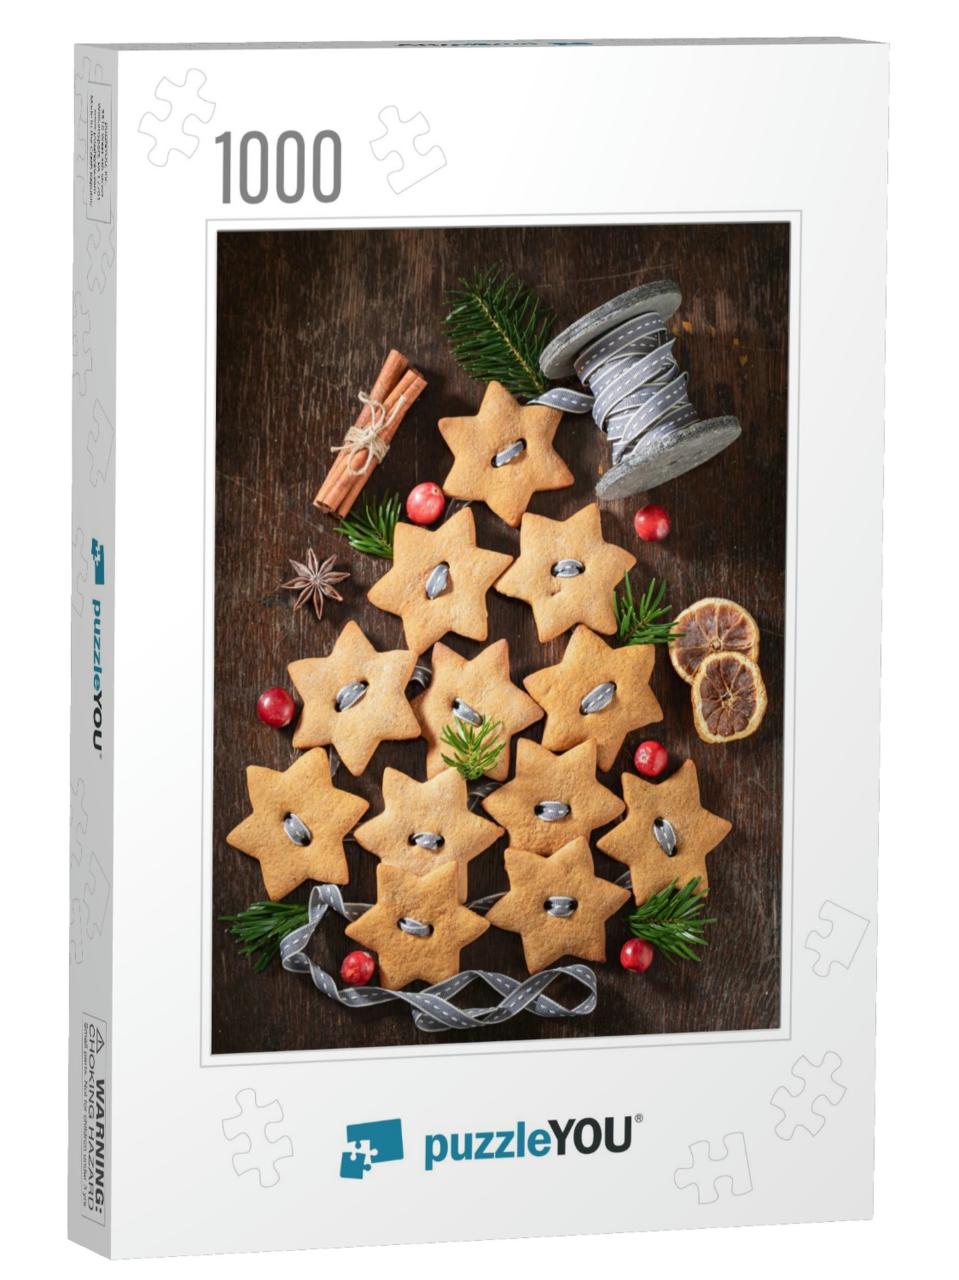 Homemade Chain Made of Gingerbread Cookies as Decoration... Jigsaw Puzzle with 1000 pieces